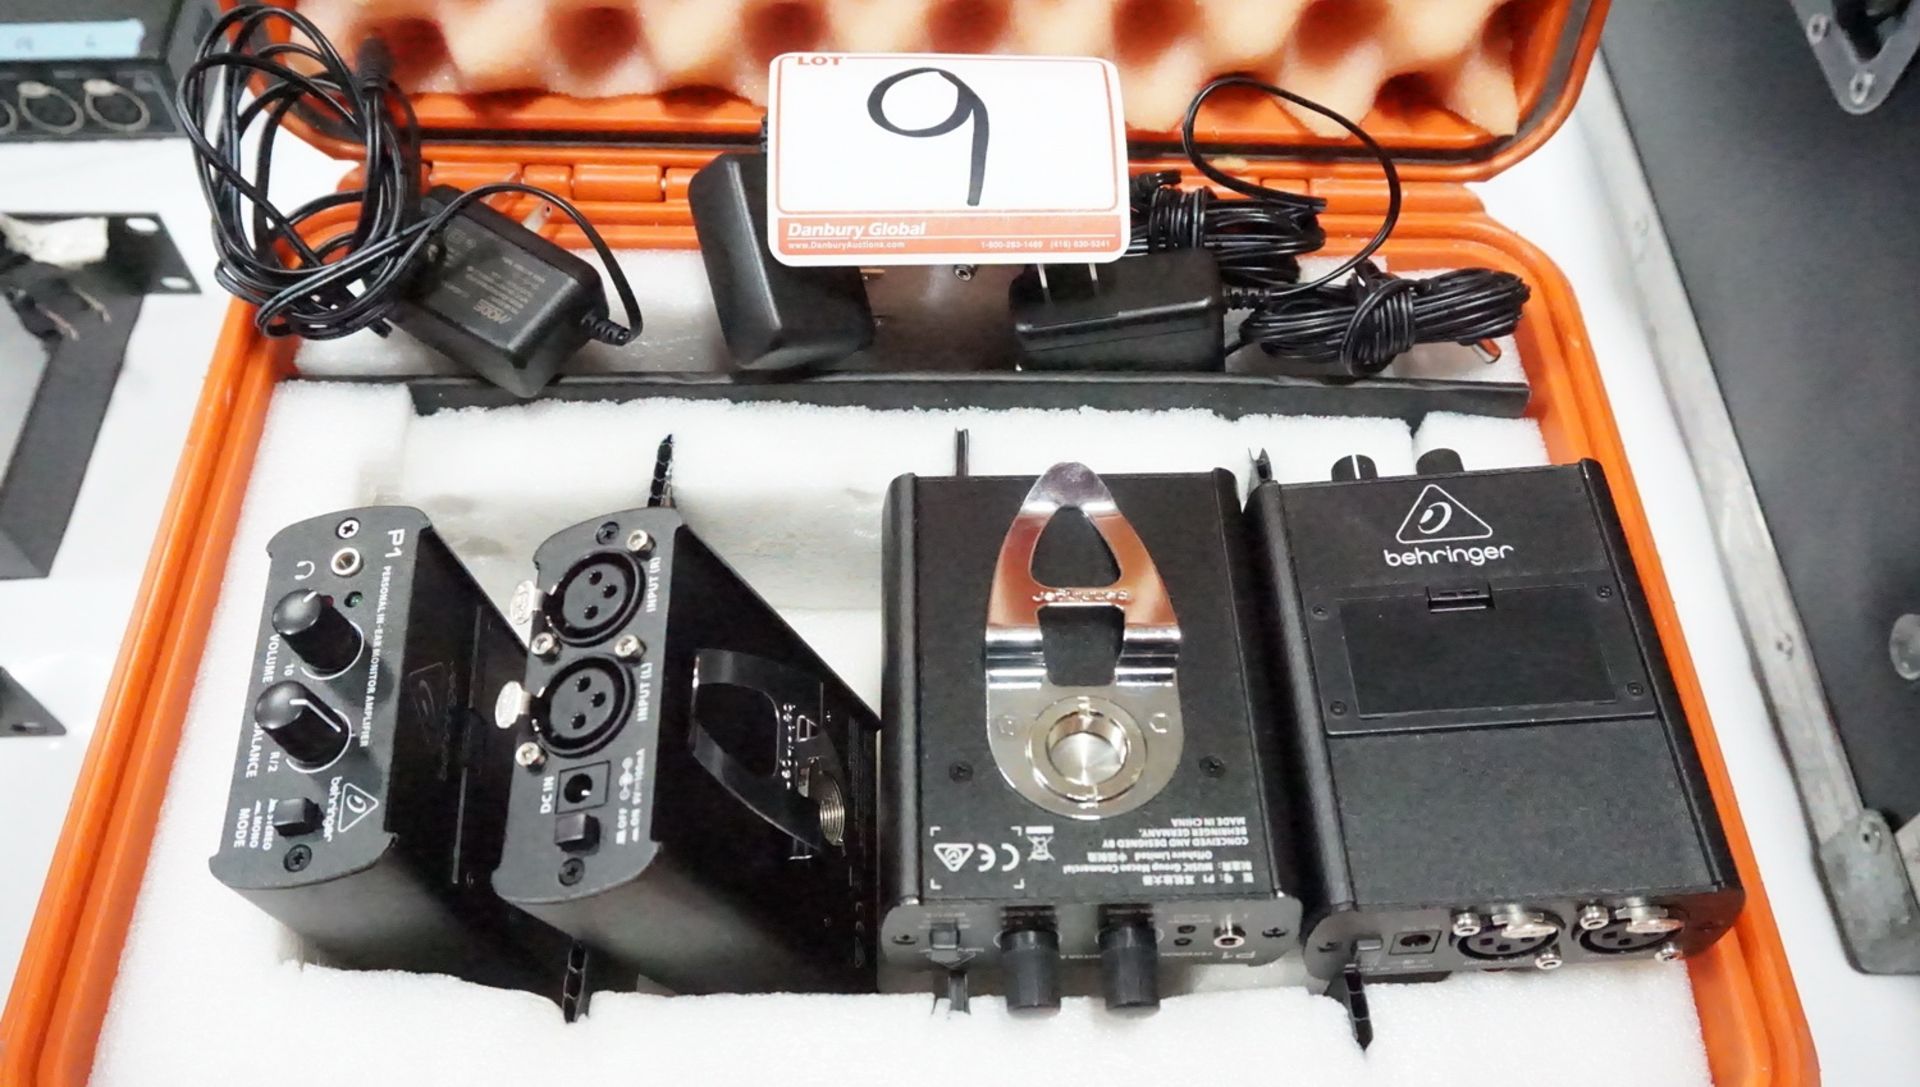 UNITS - BEHRINGER POWERPLAY P1 PERSONAL WIRED IN-EAR MONITOR AMPLIFIERS W/ POWER SUPPLIES IN CASE